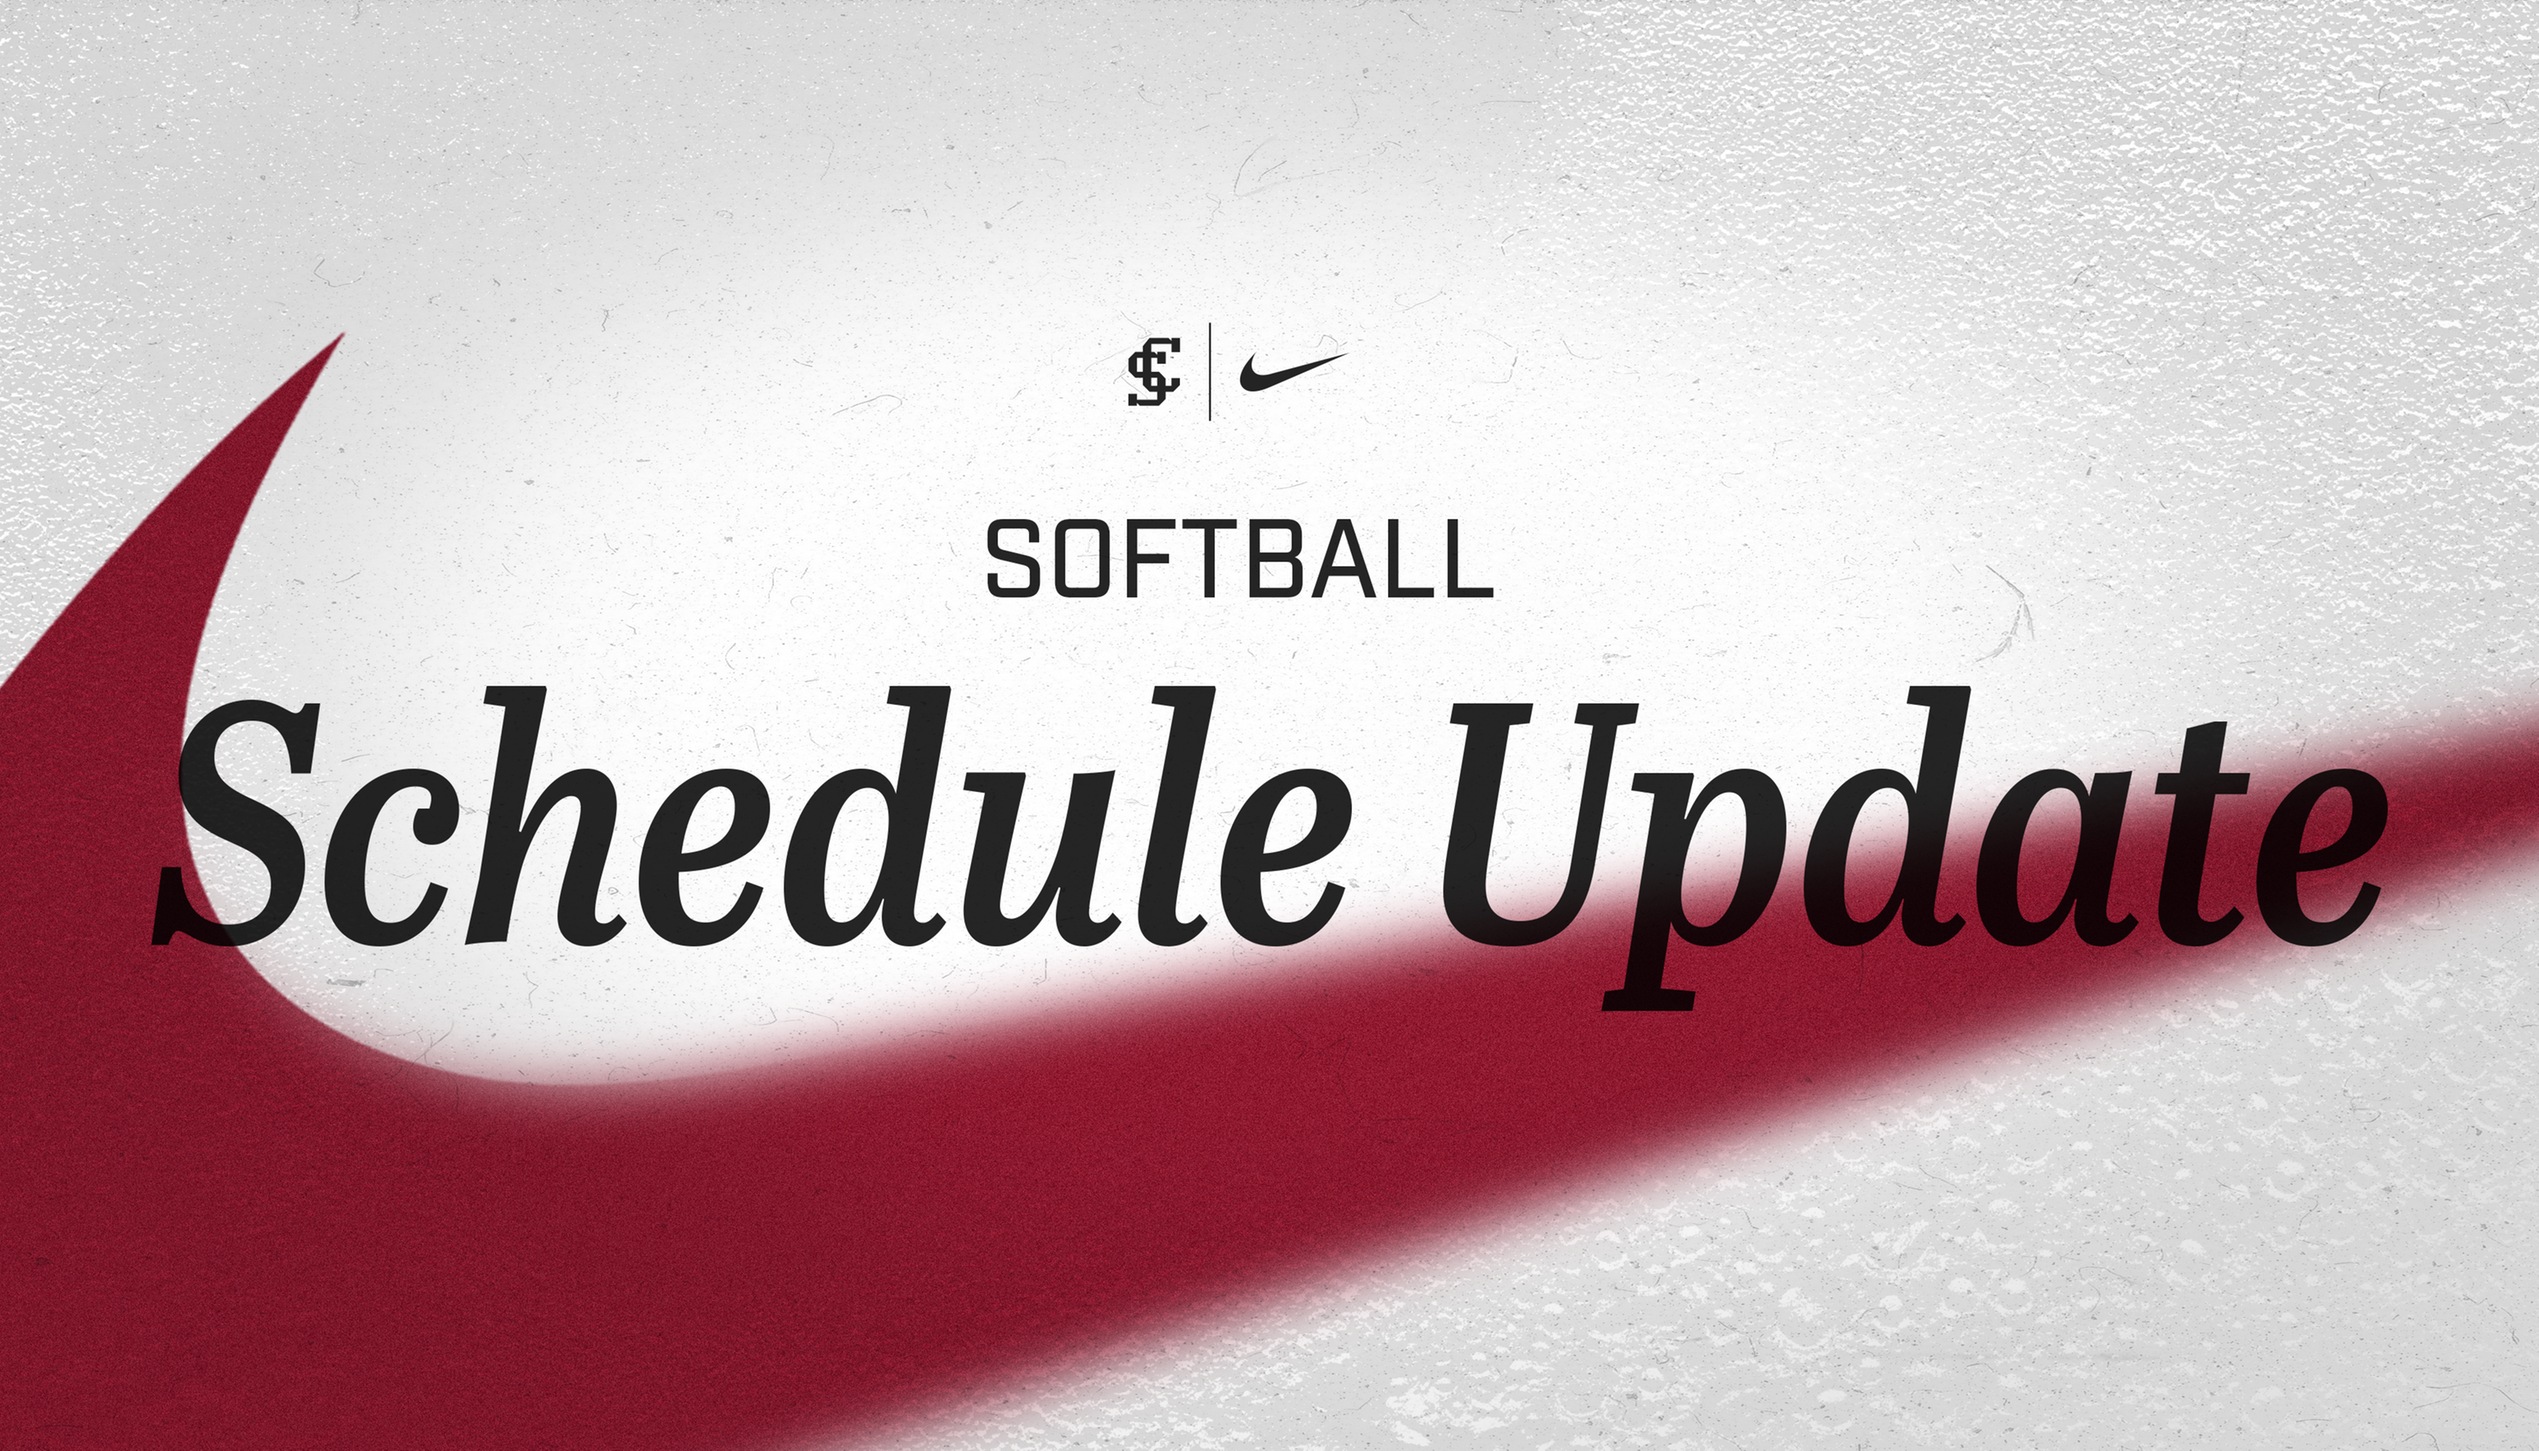 Sunday's SVC II Tourney Games Canceled; Rhode Island DH on Monday